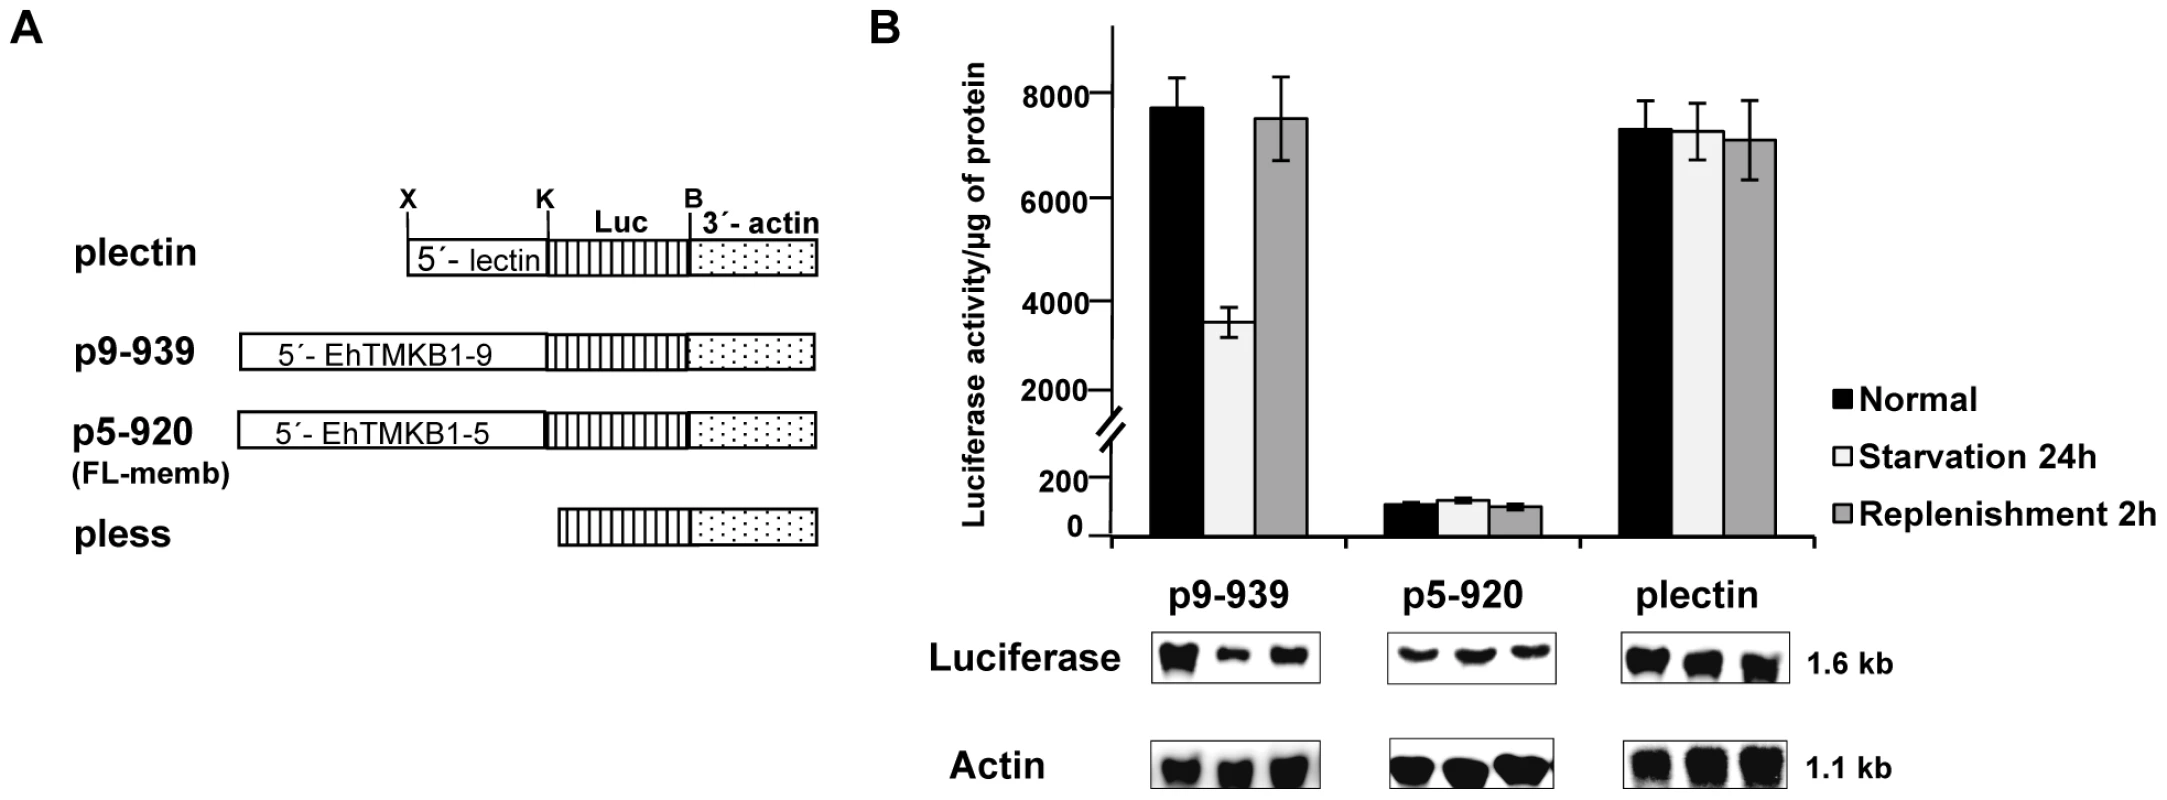 Promoter analysis of EhTMKB1-9 using luciferase as a reporter gene.